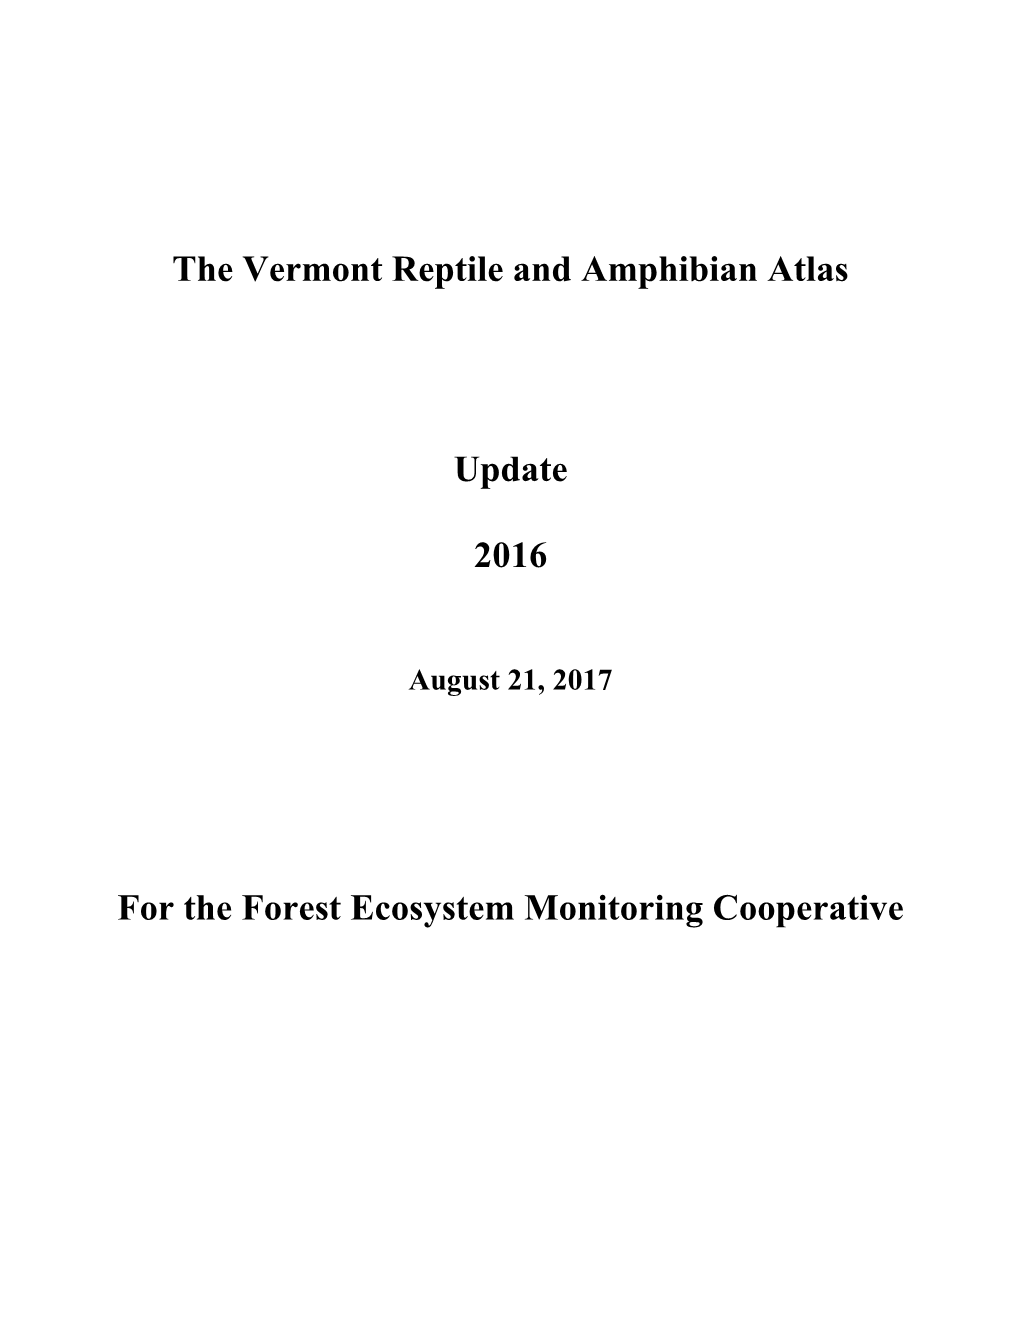 The Vermont Reptile and Amphibian Atlas Update: 2016